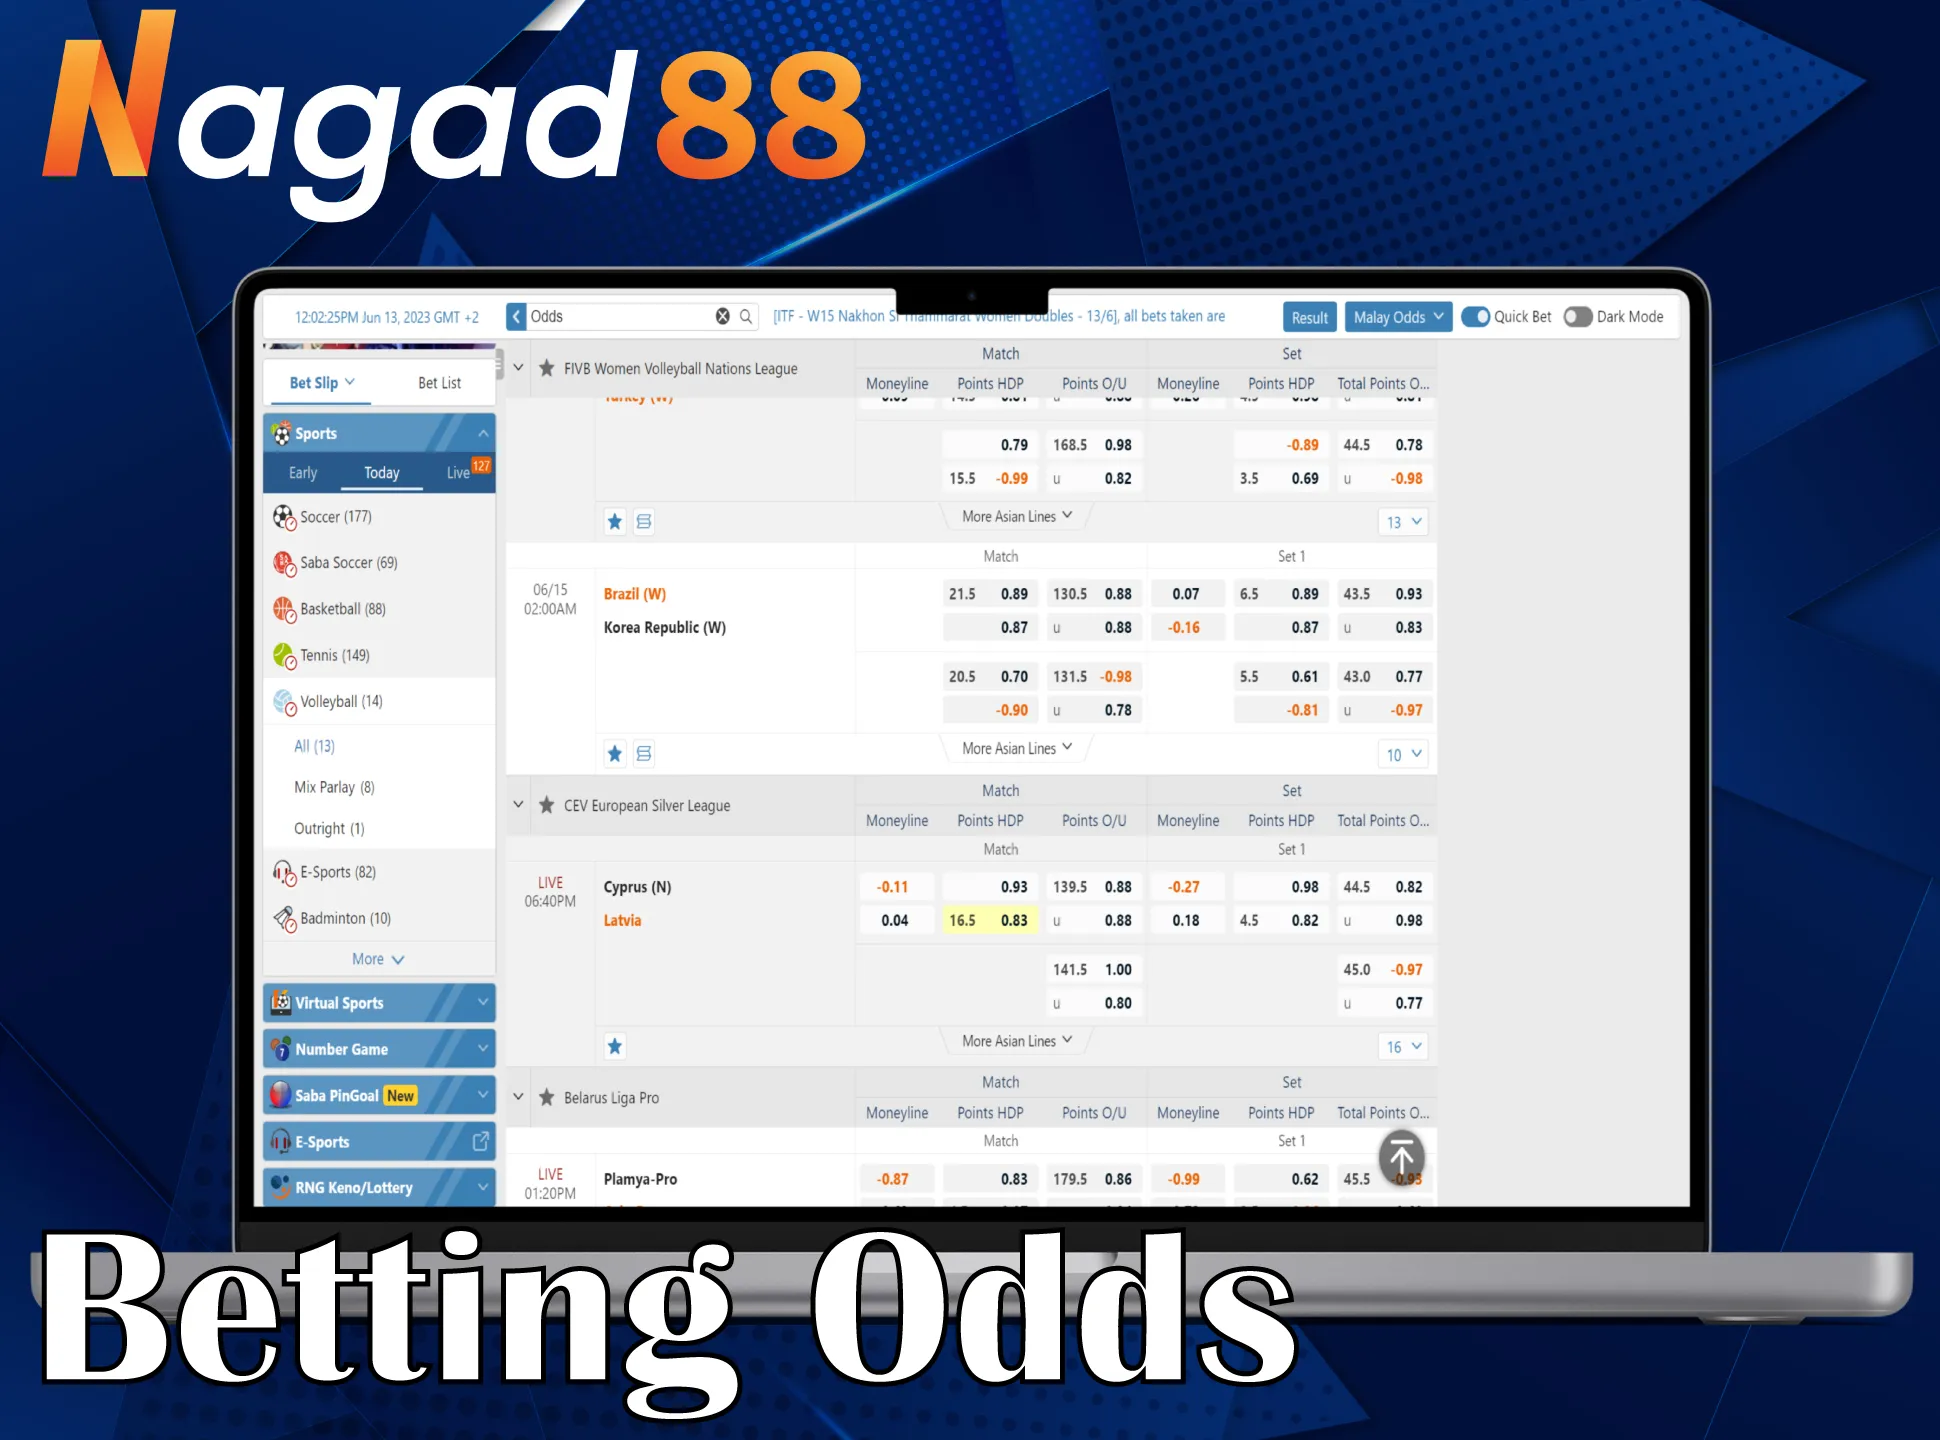 With Nagad88 you have the best betting odds available.